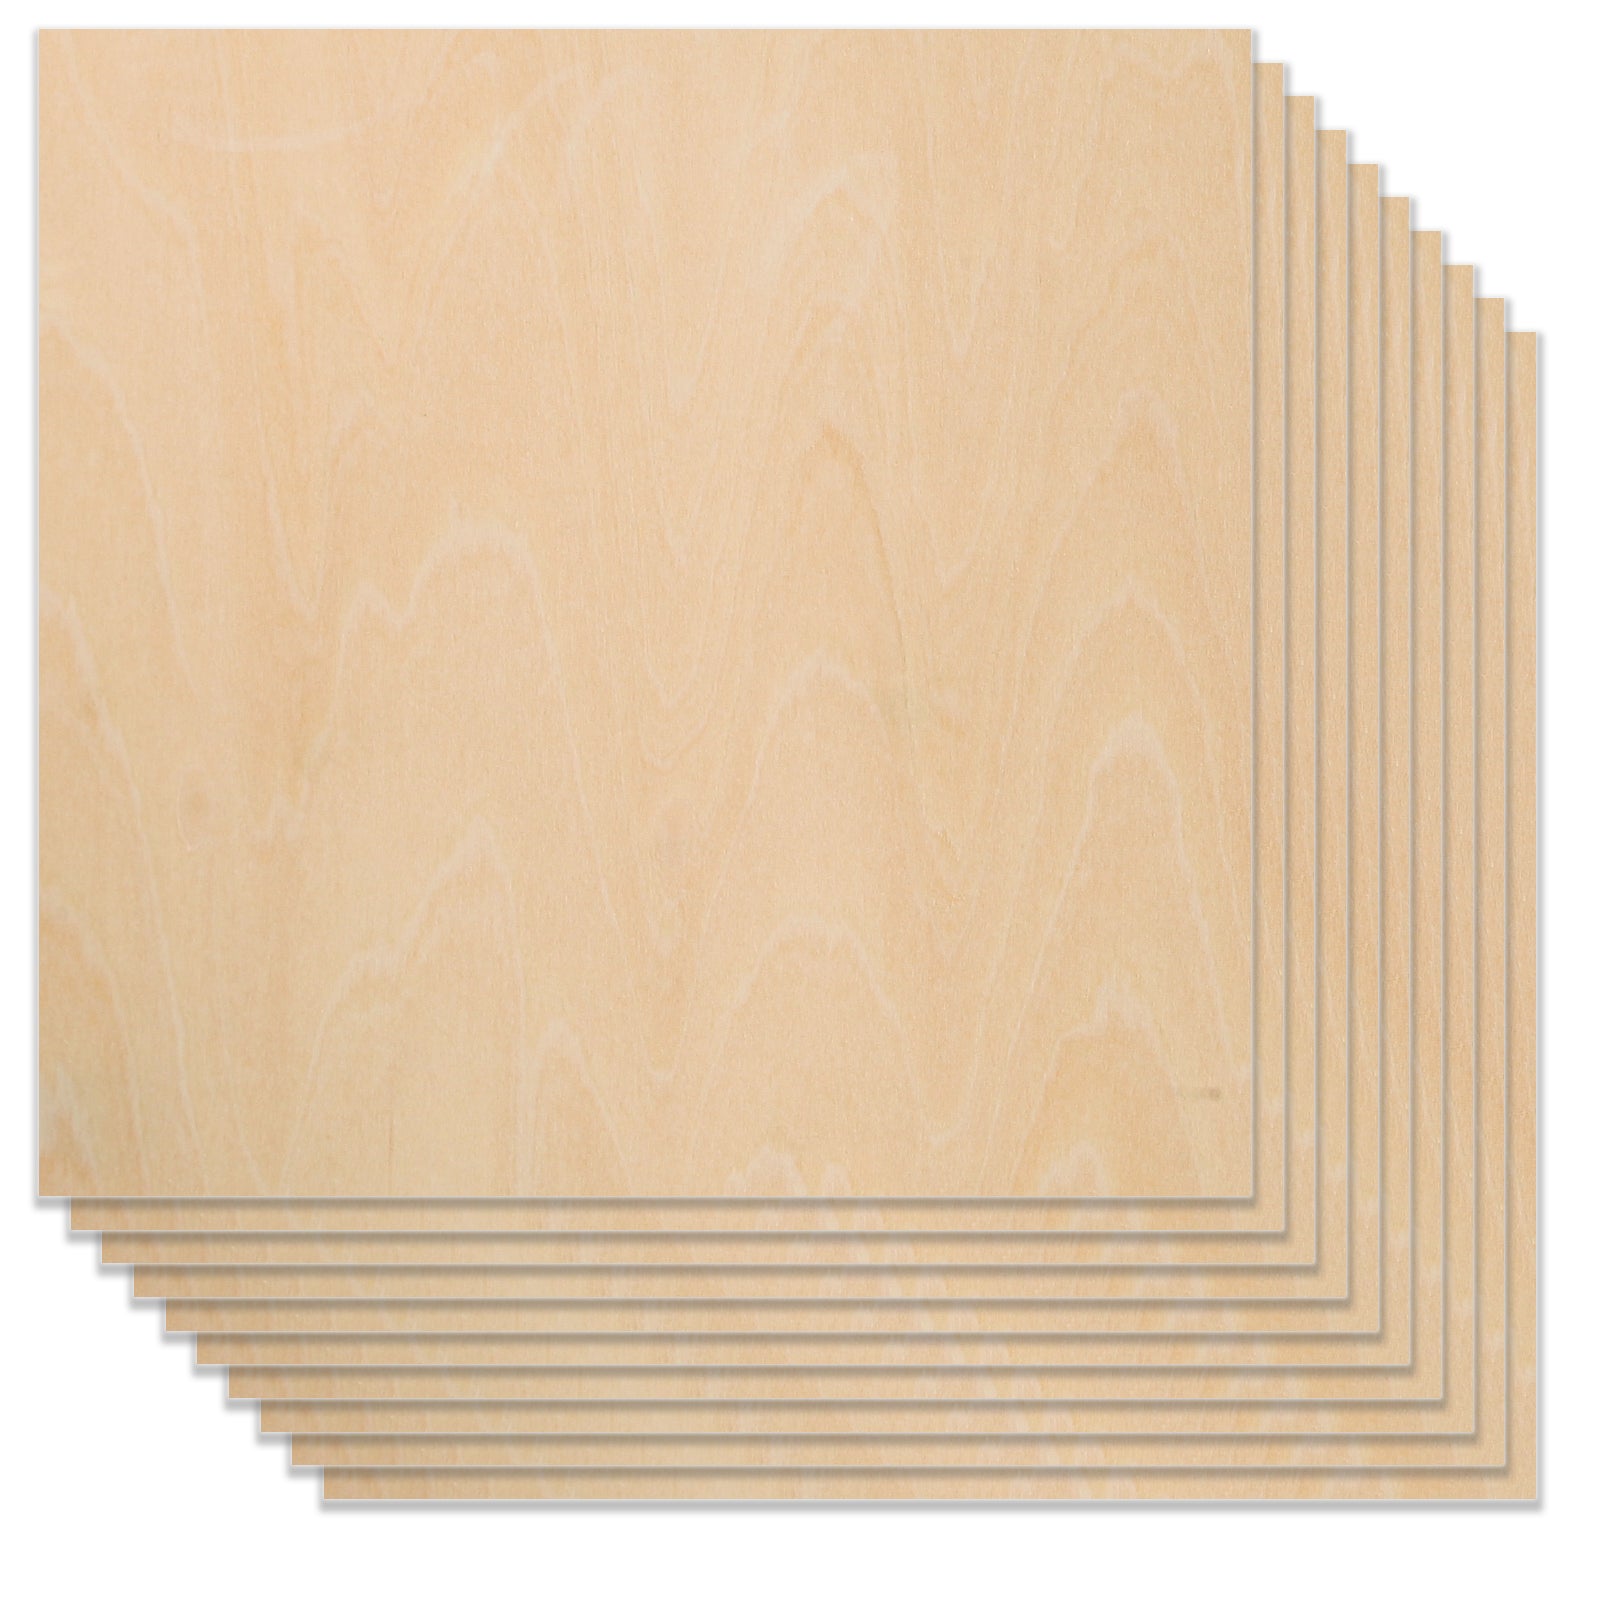 A stack of ten thin, light 10pcs A4 Plywood Sheets 11.8*11.8*1/8” for Falcon Laser Engraving And Cutting with a smooth surface and subtle, natural grain patterns. Perfect for use with a Creality Falcon laser engraver, the sheets are fanned out slightly so that the edges of each sheet are visible.